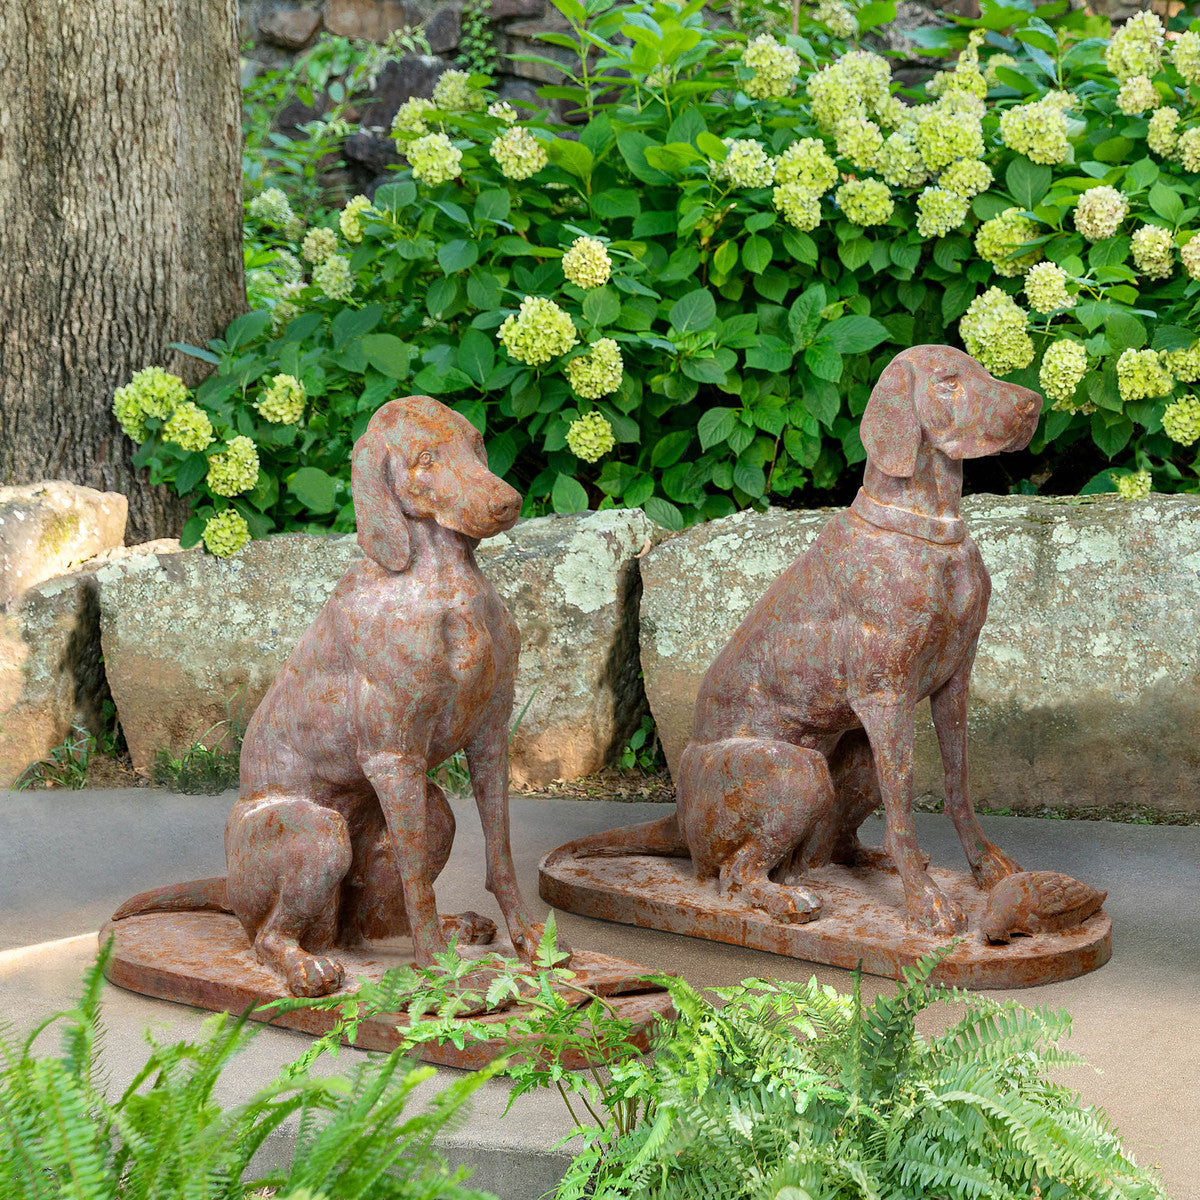 Estate iron Hound Statues for sale, Antique Iron Dog Statues for sale